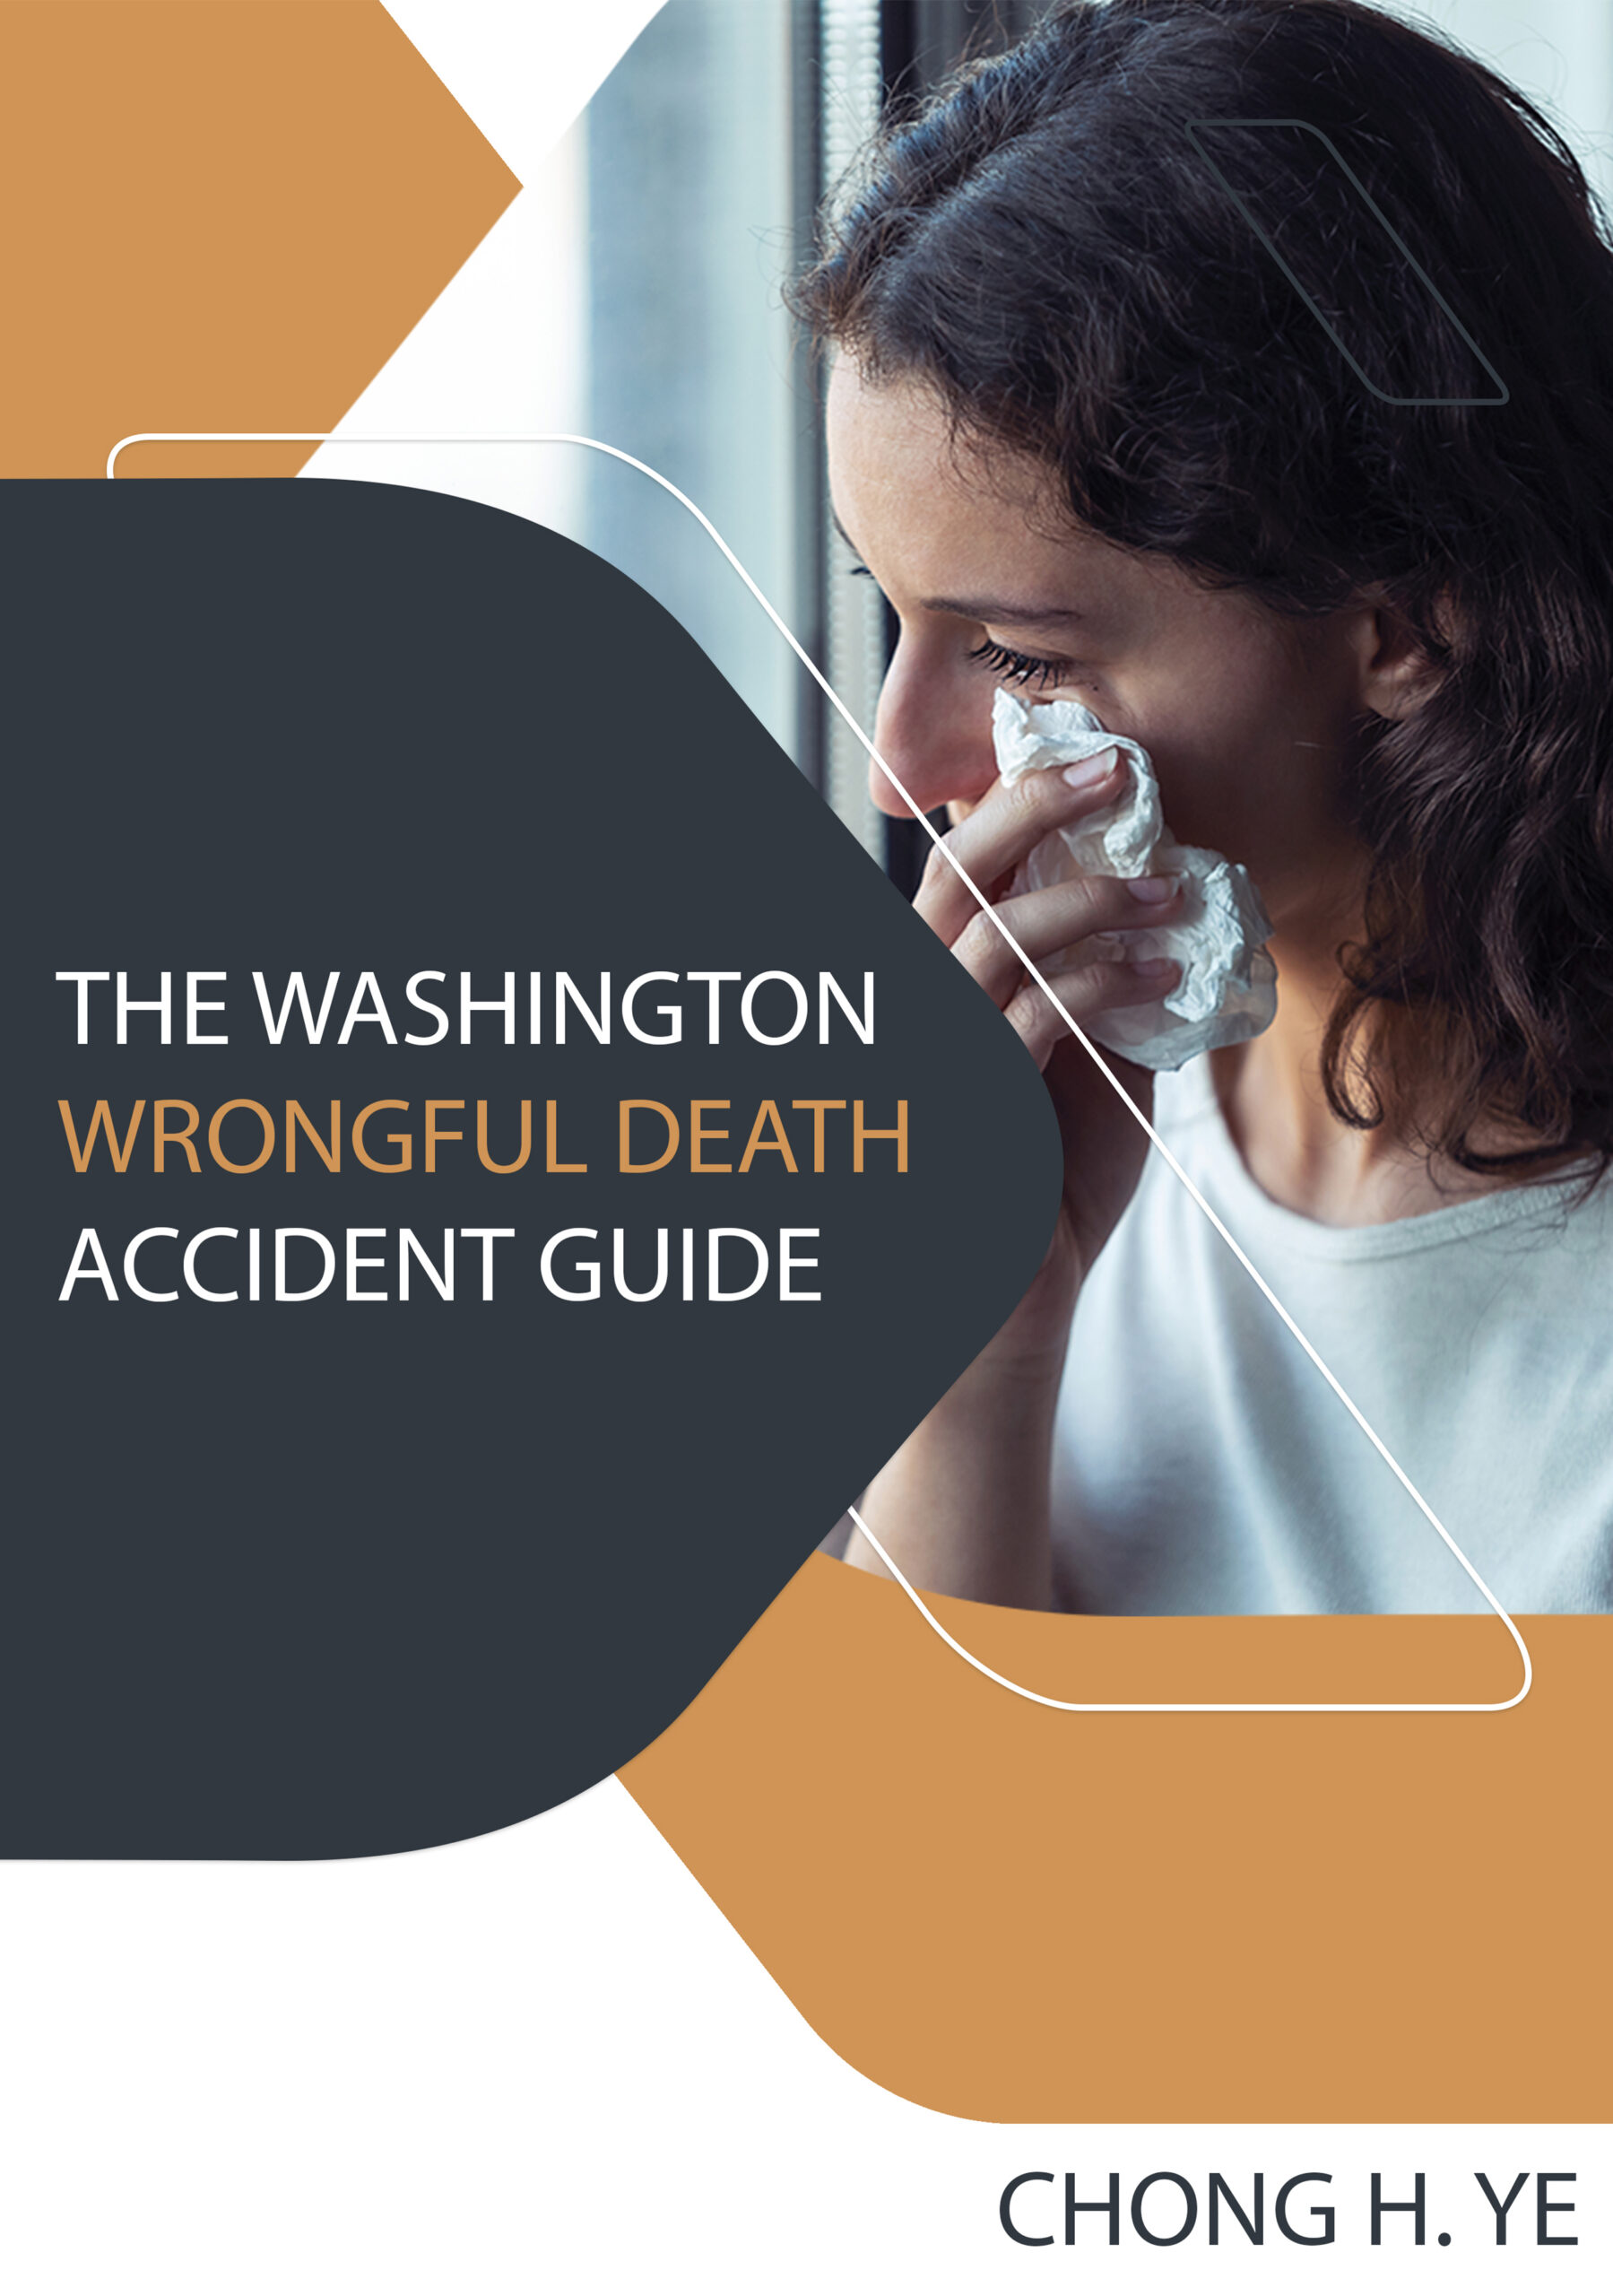 The Washington State Wrongful Death Accident Guide